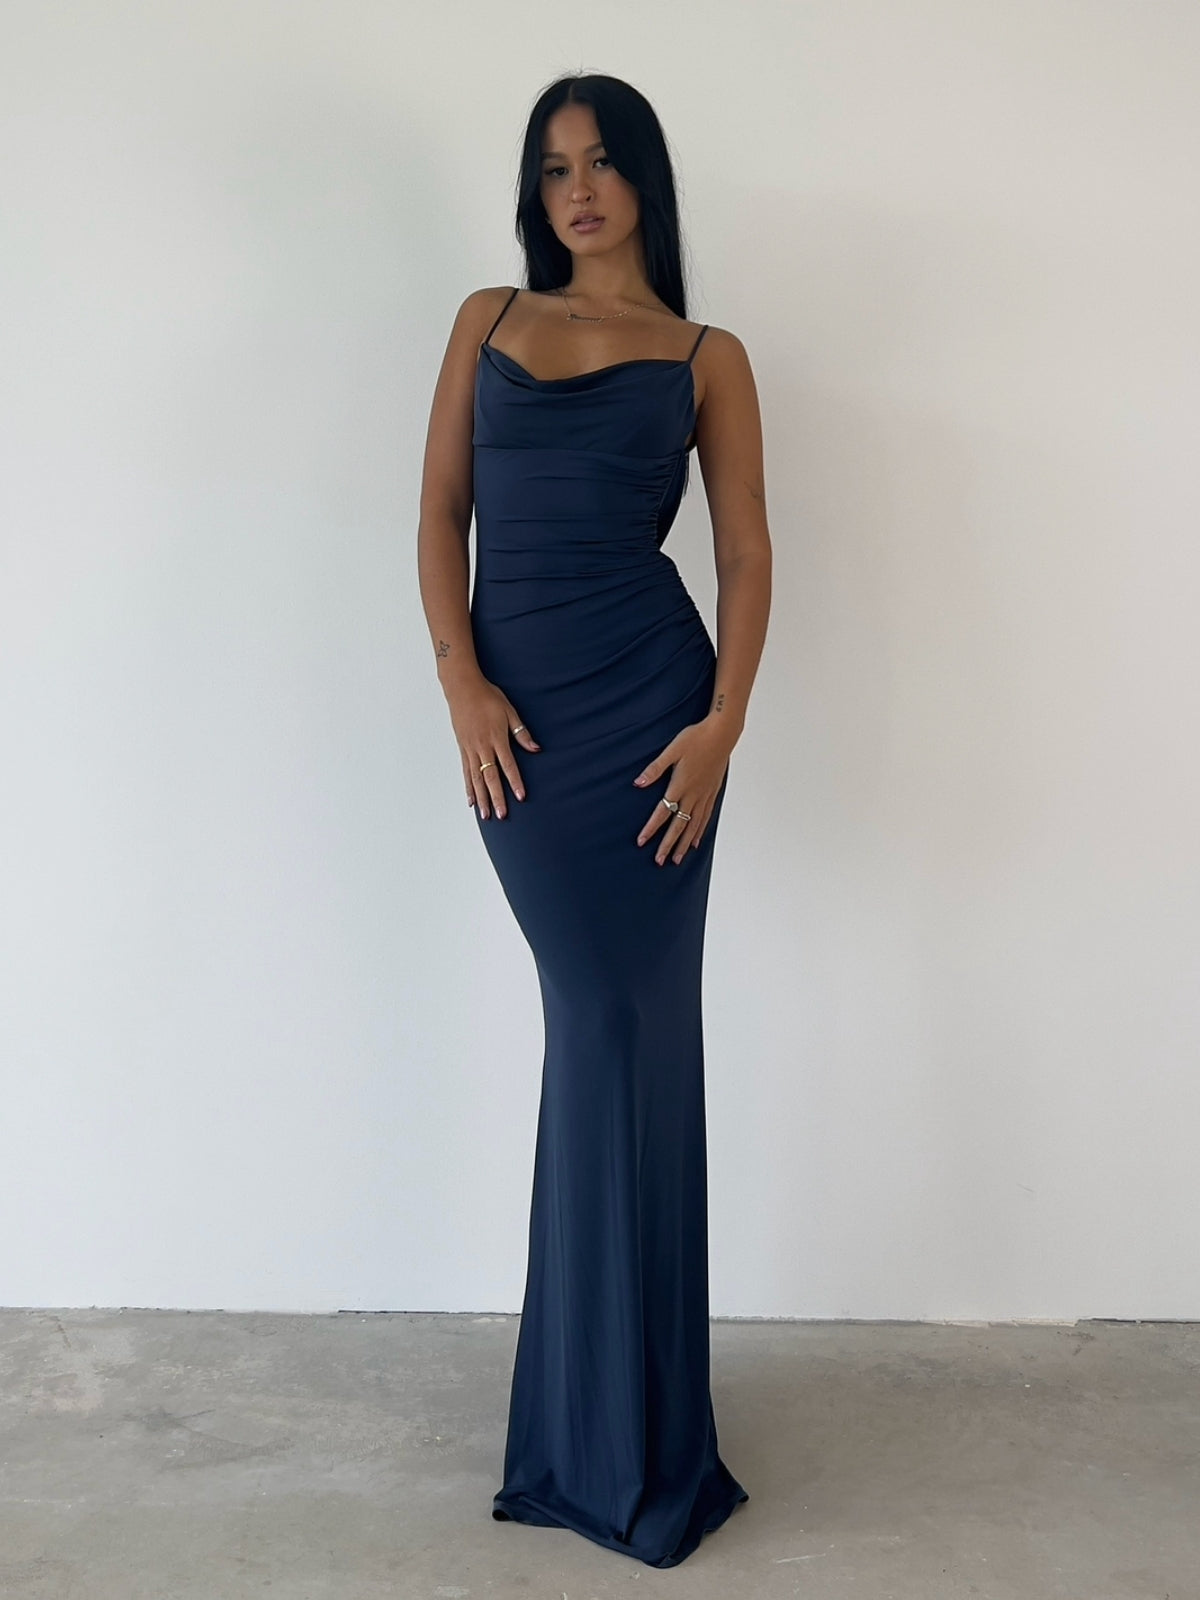 Surreal Gown - Navy